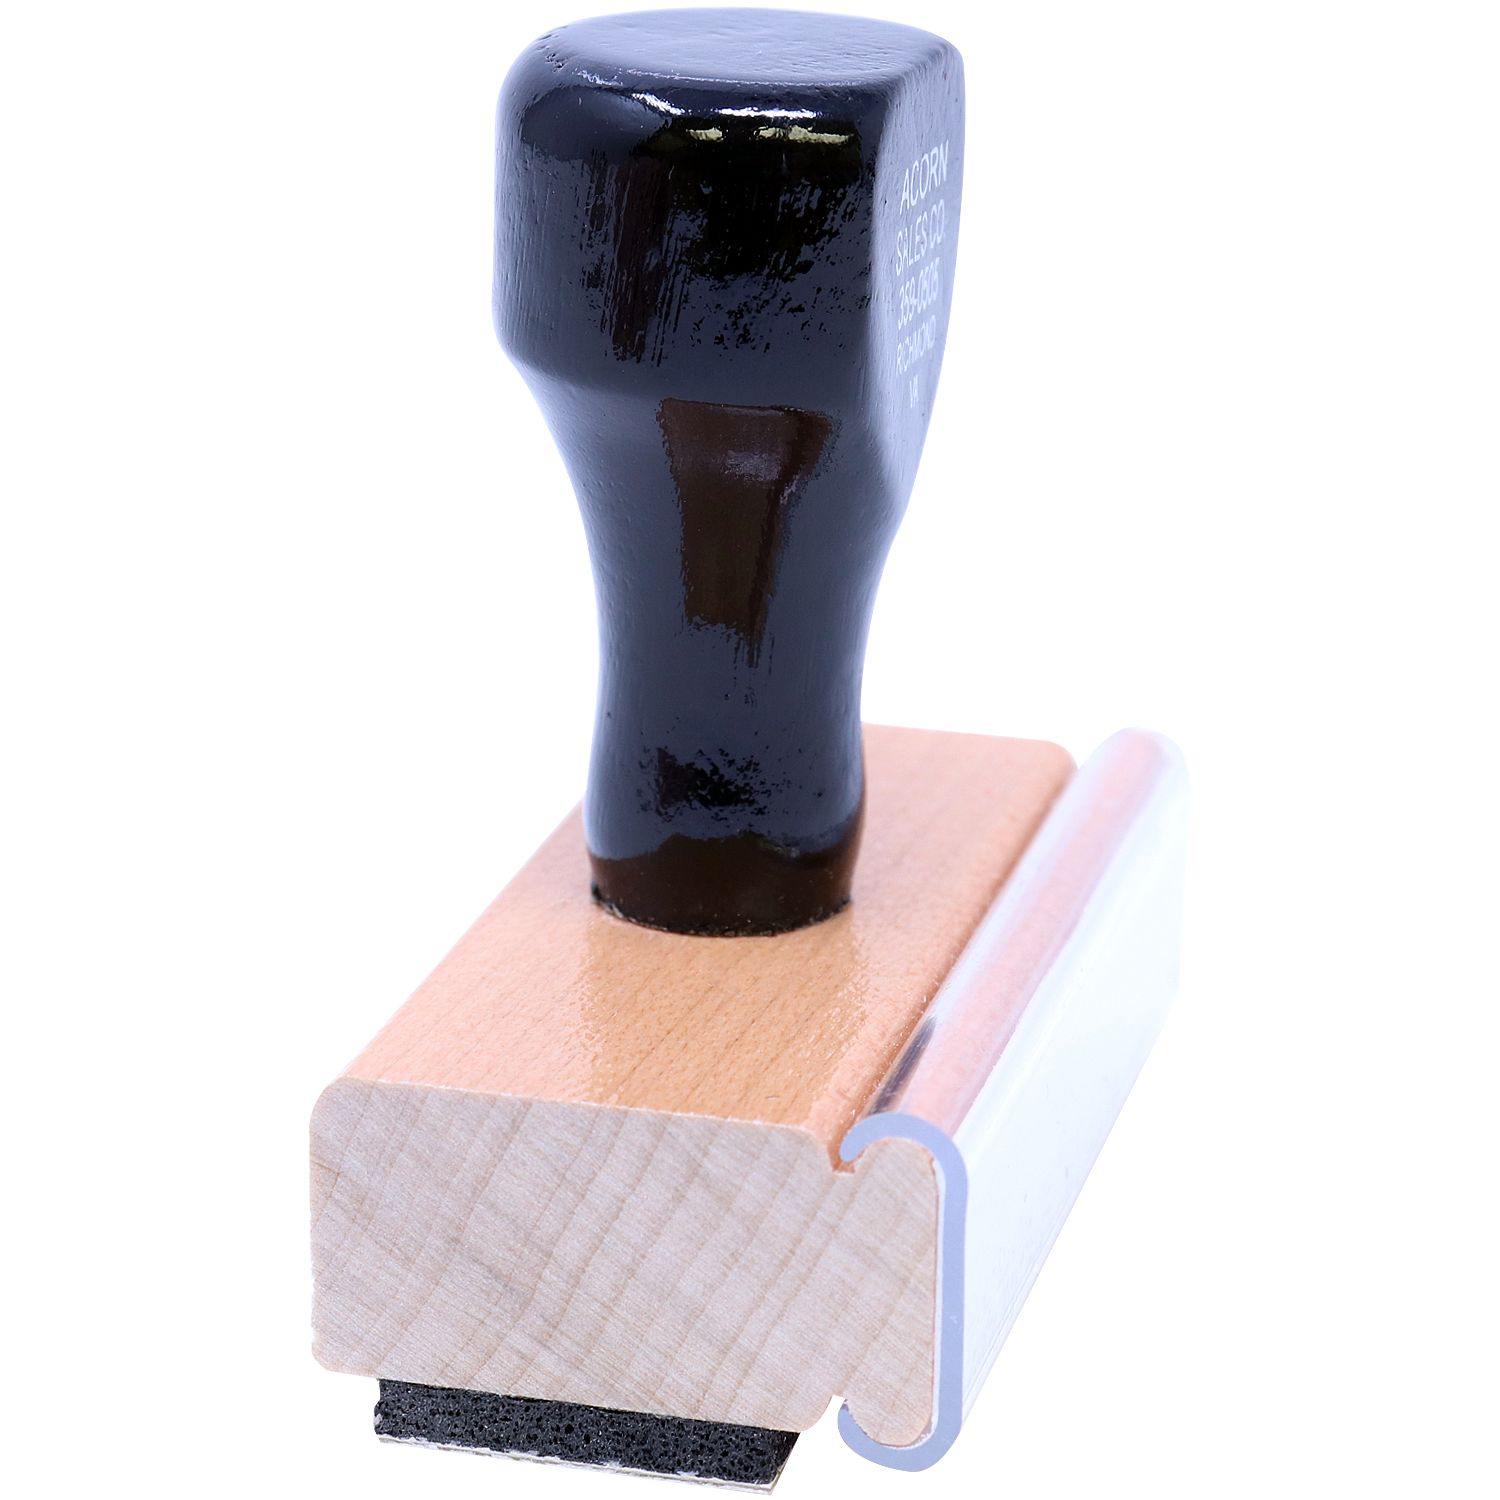 Side View of Large Judge's Copy Rubber Stamp at an Angle